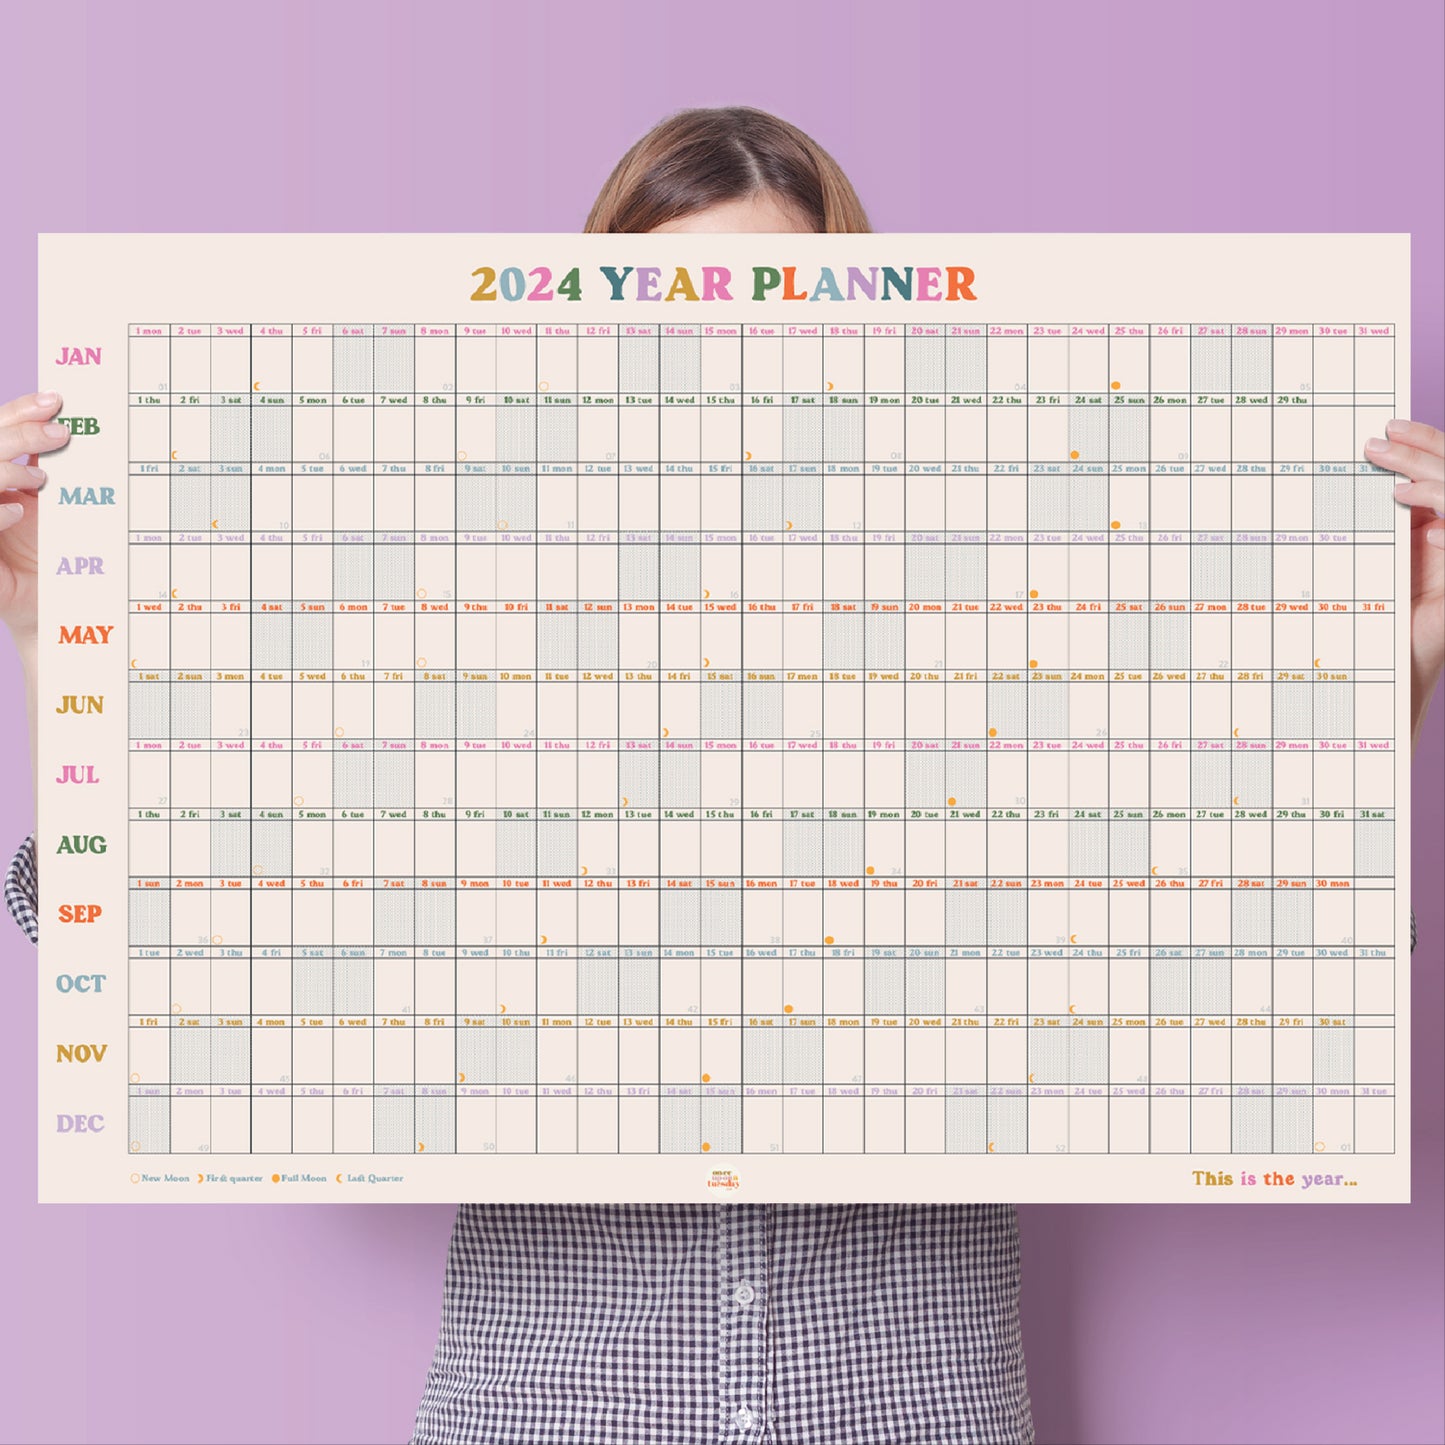 This is the year wall planner 2024